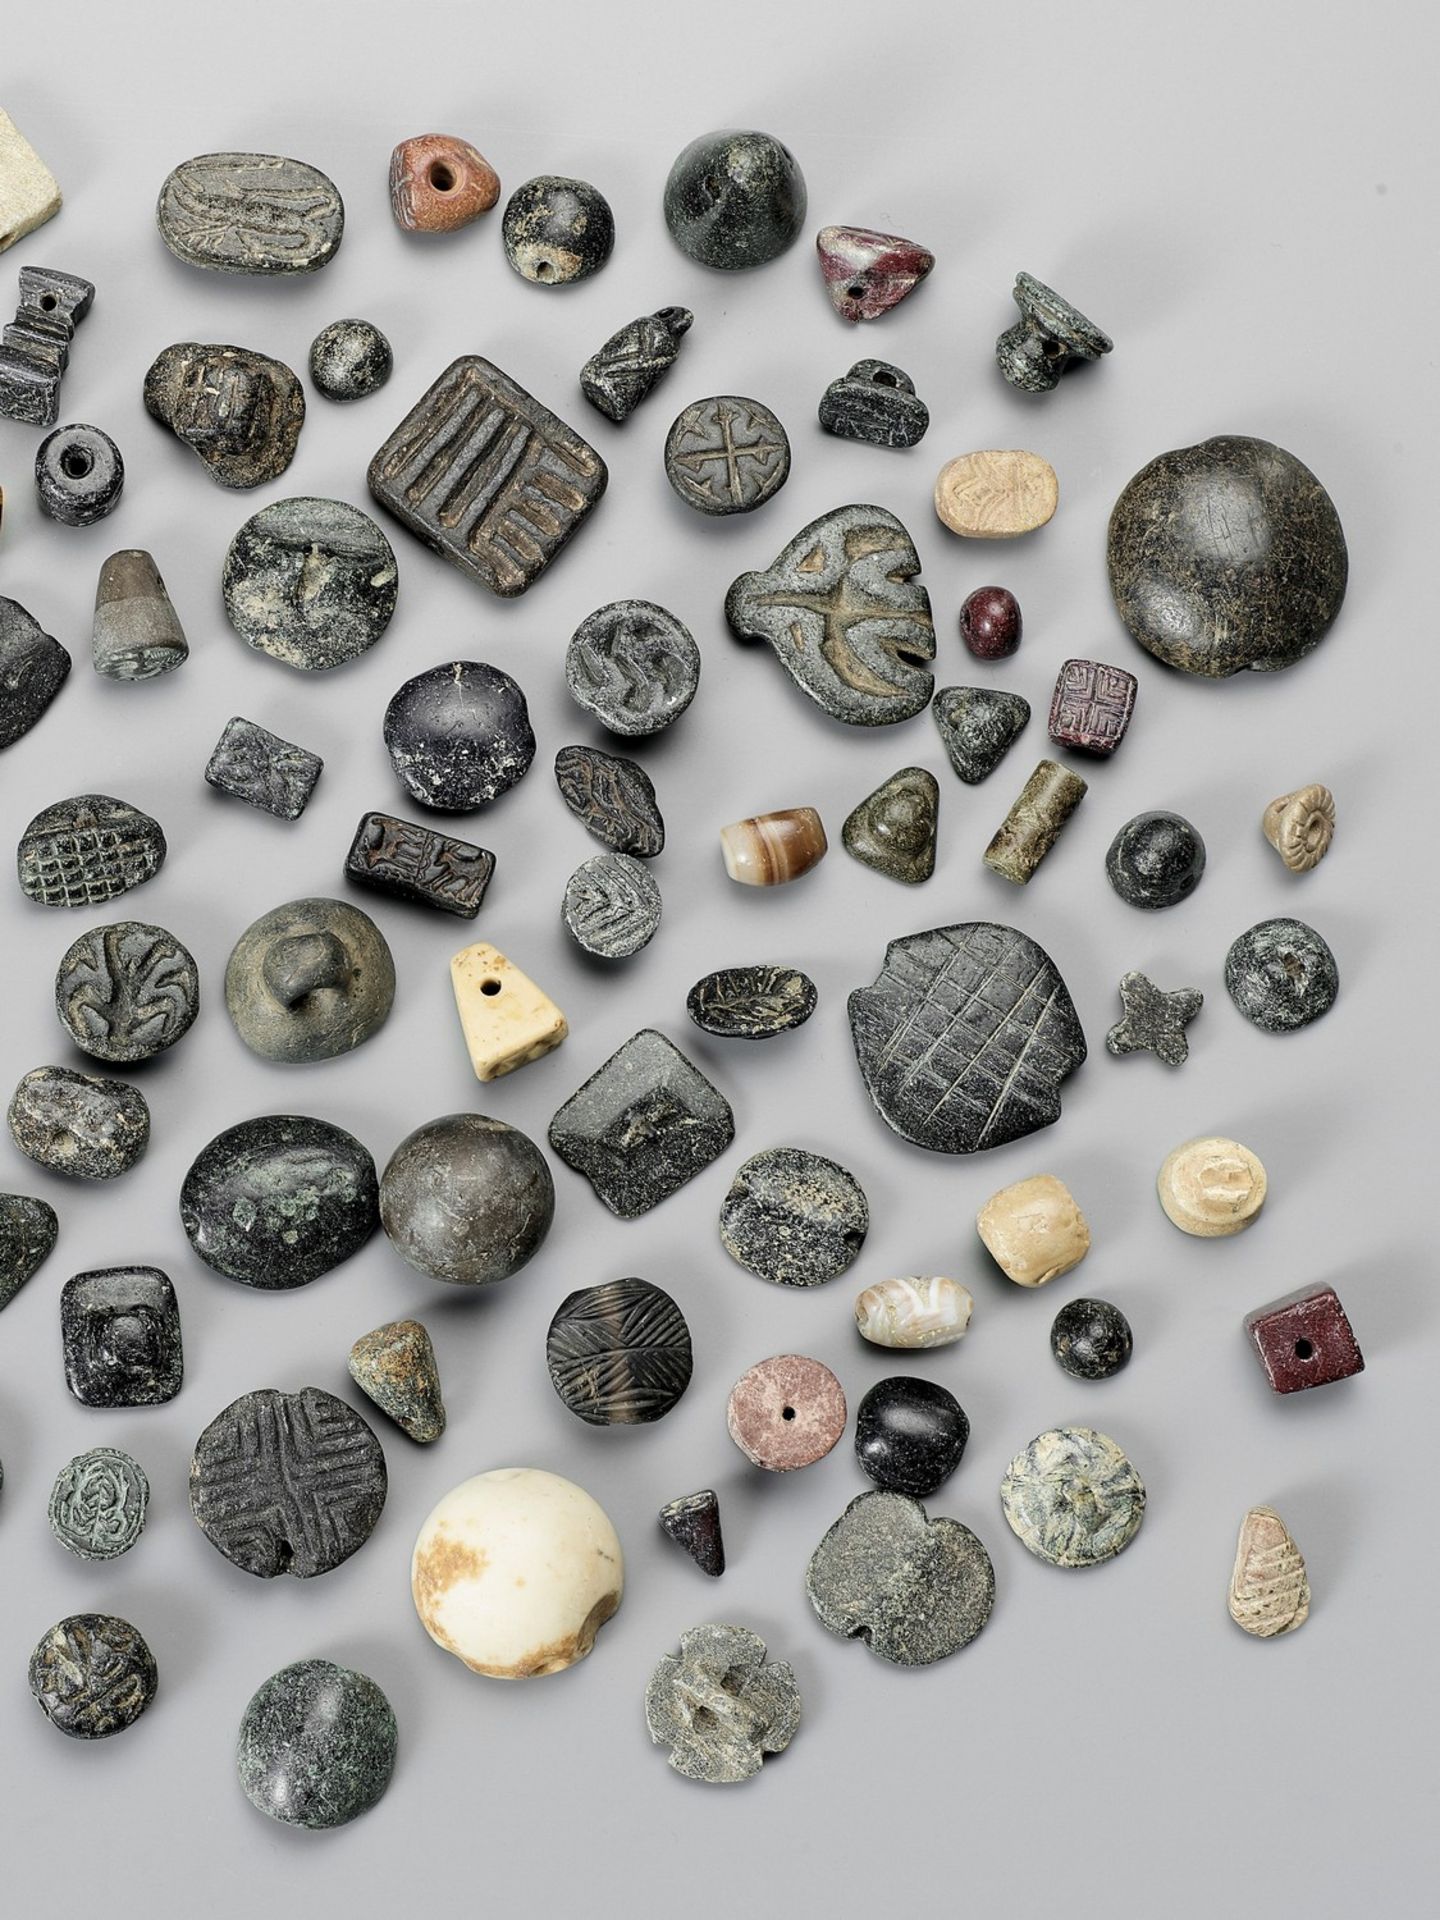 AN AMAZING COLLECTION OF 101!!! NEAR EAST ANCIENT SEALS AND BEADS - Image 3 of 4